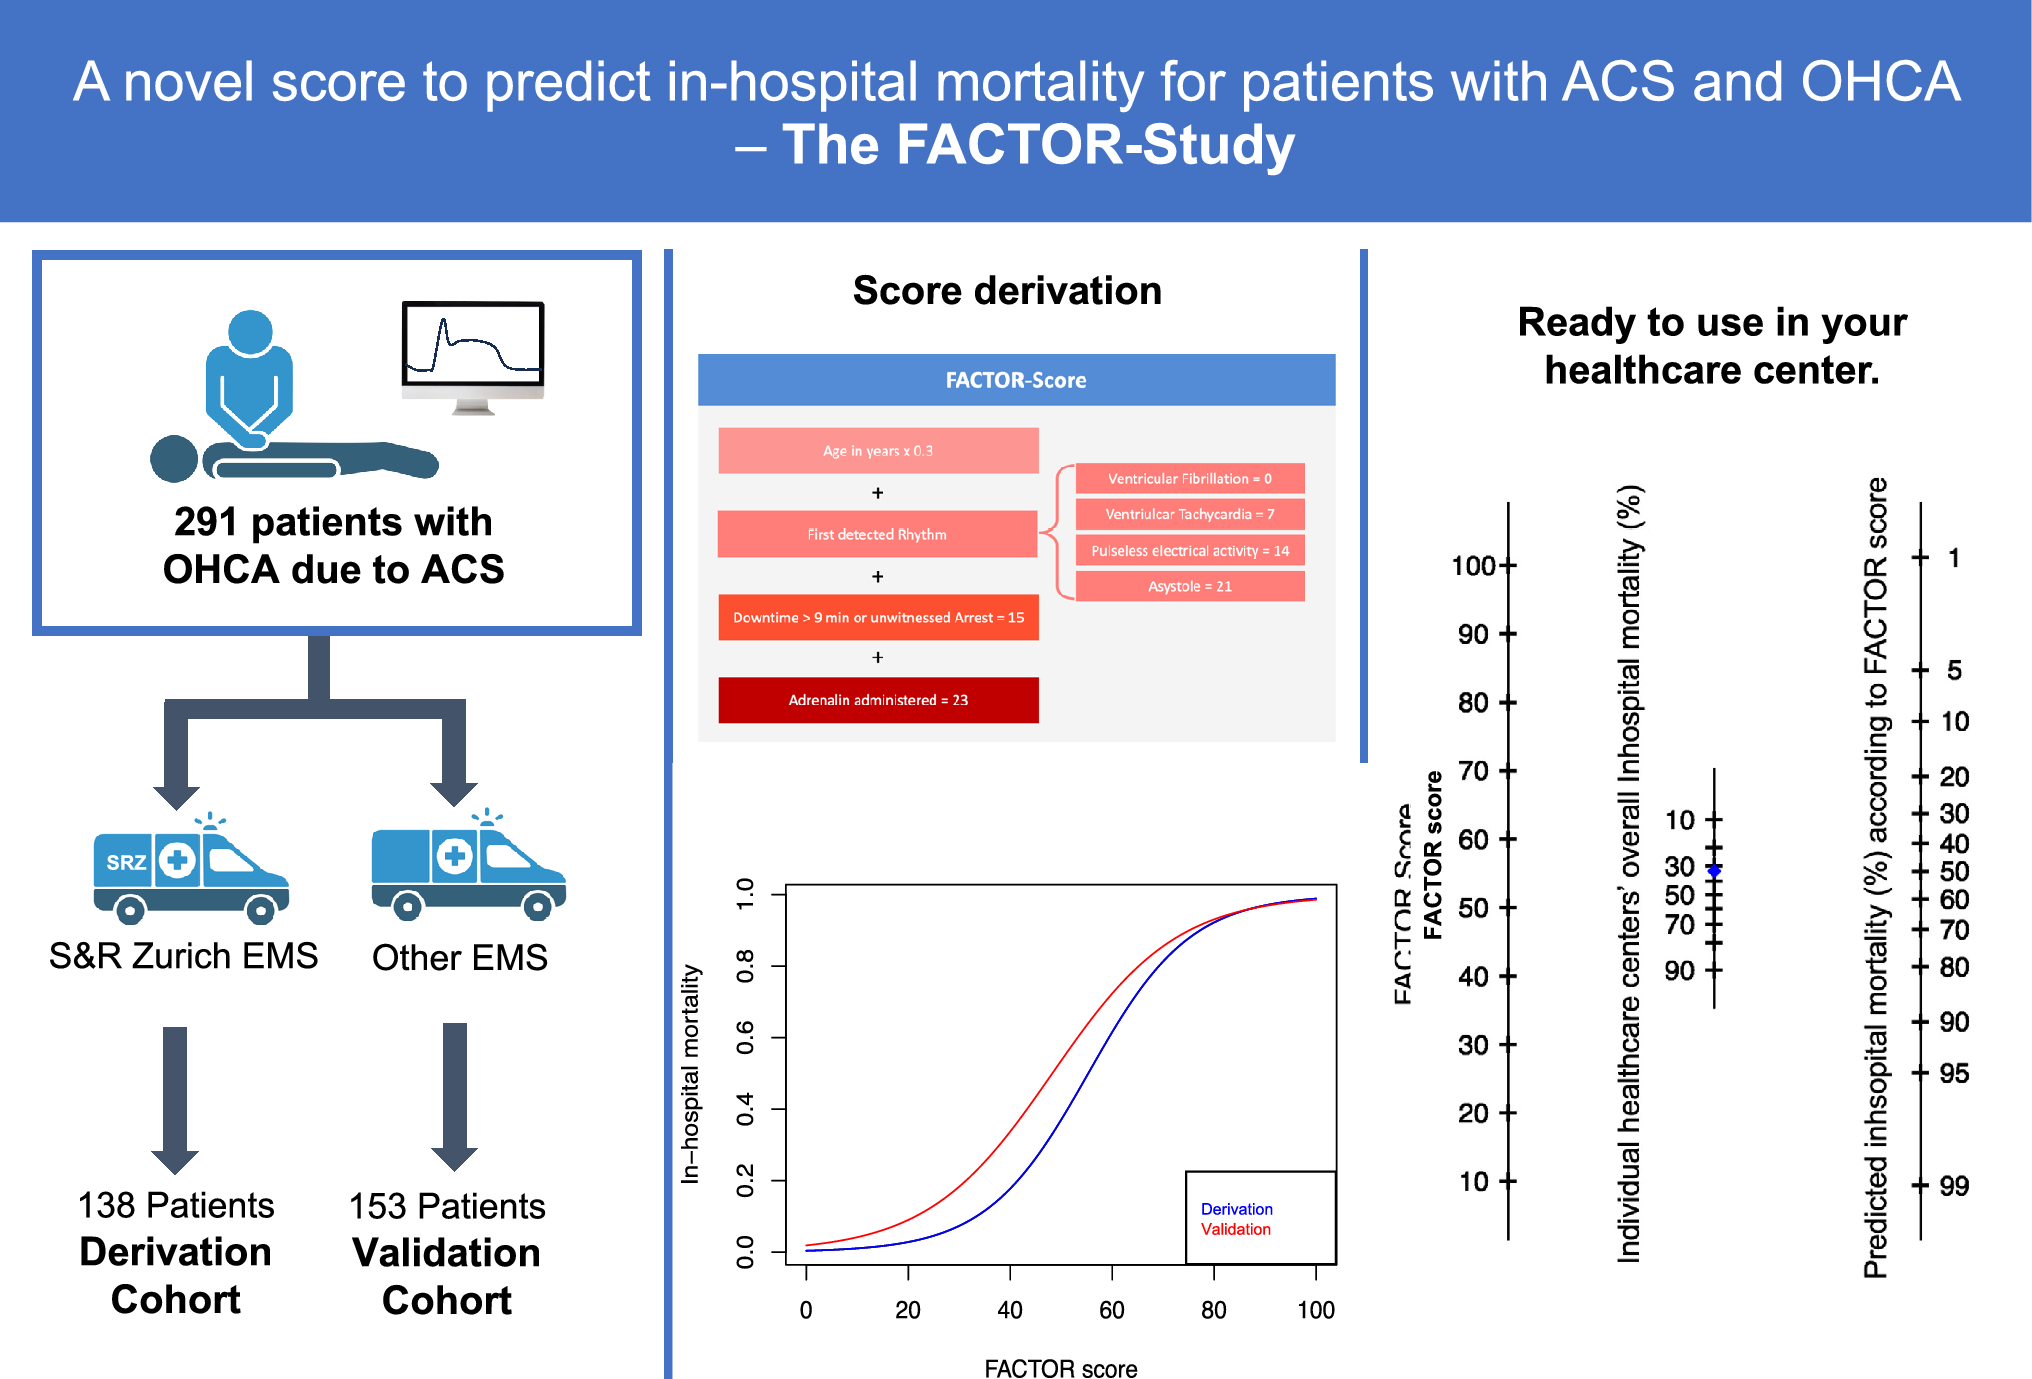 A novel score to predict in-hospital mortality for patients with acute coronary syndrome and out-of-hospital cardiac arrest: the FACTOR study